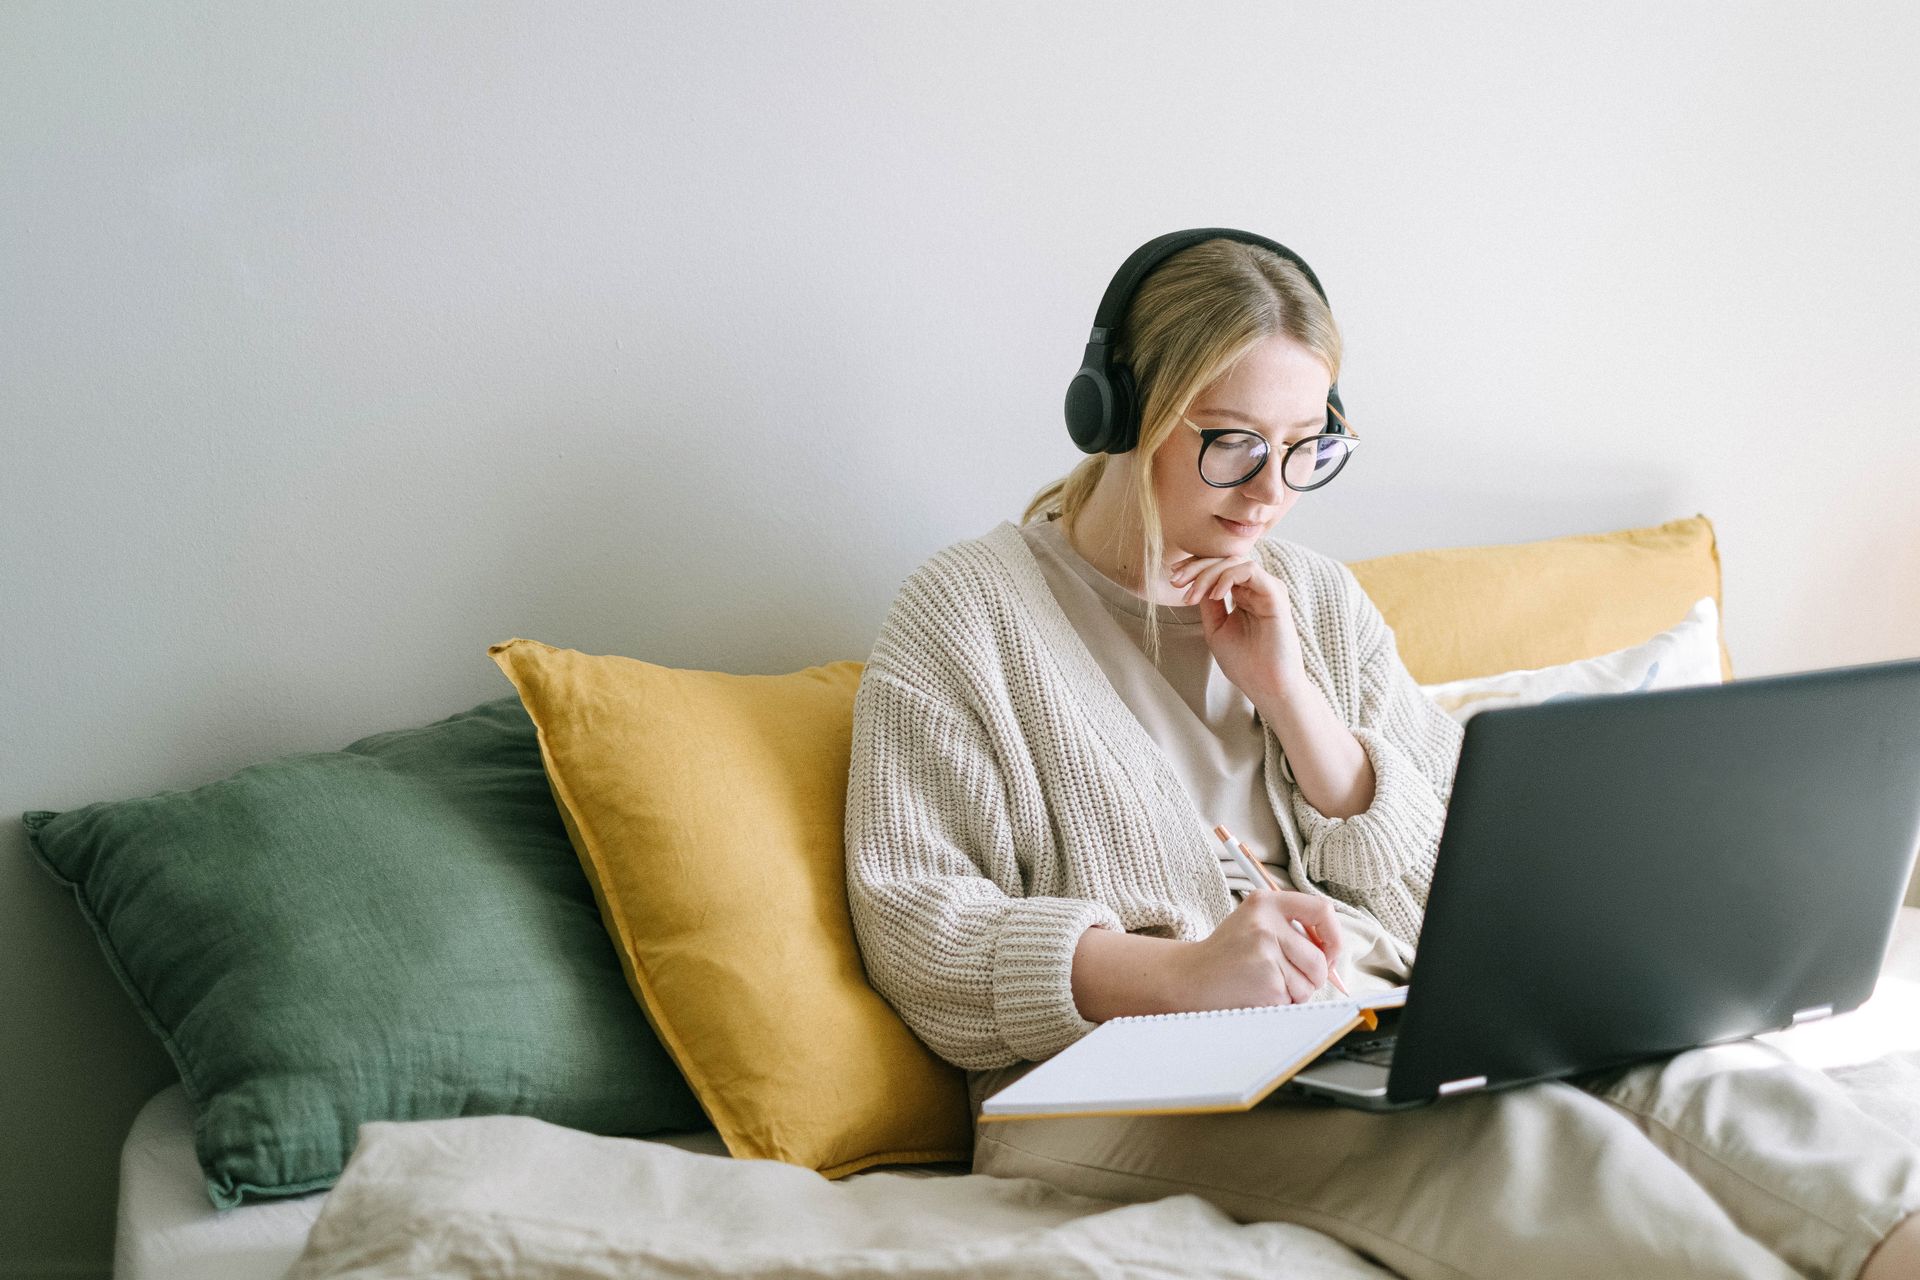 Image of woman with headphones sitting on  couch writing